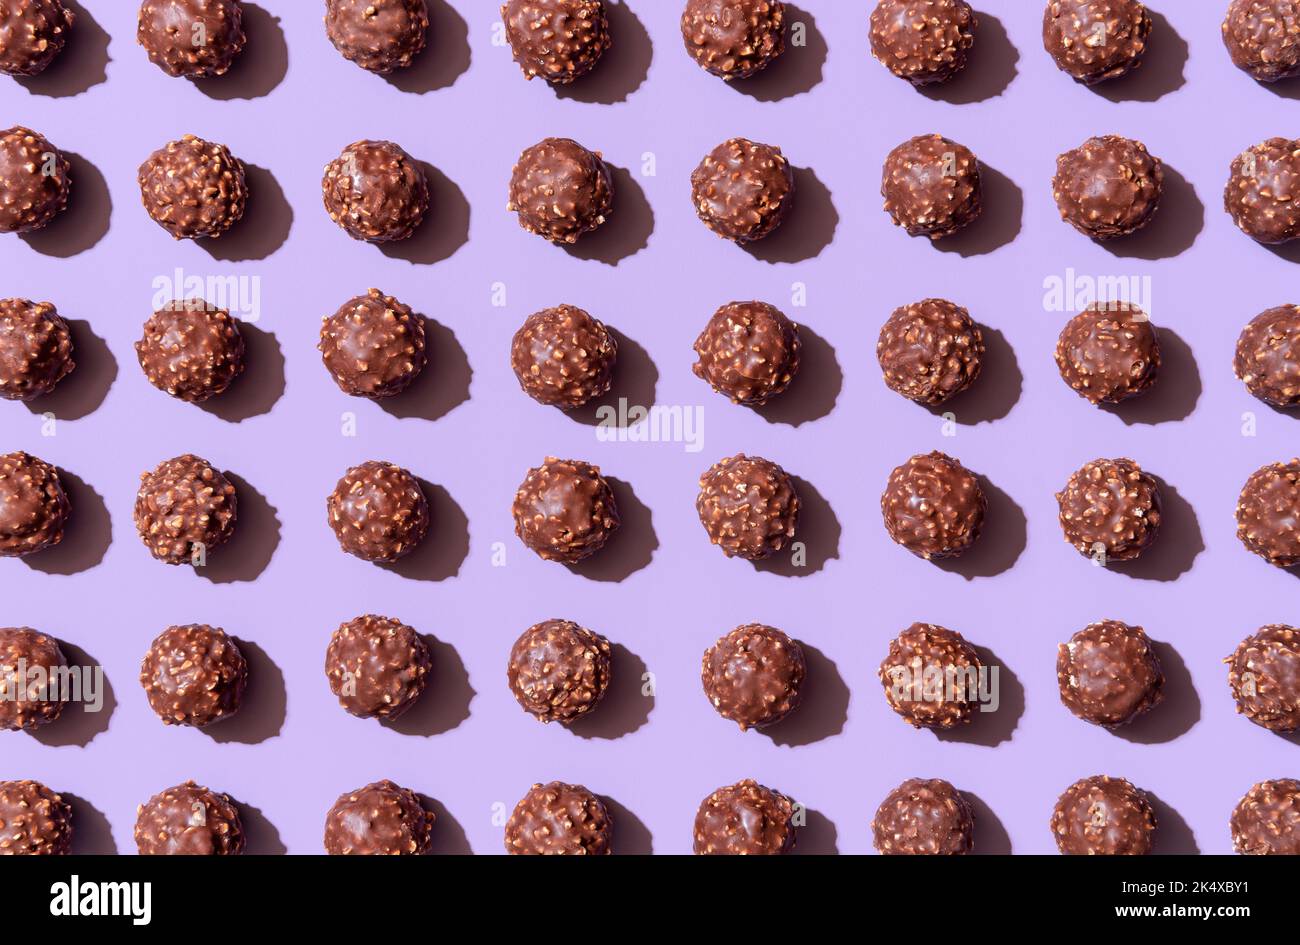 Full-frame background with many chocolate truffles aligned symmetrically on a purple table. Chocolate and hazelnuts candies in bright light on a vibra Stock Photo